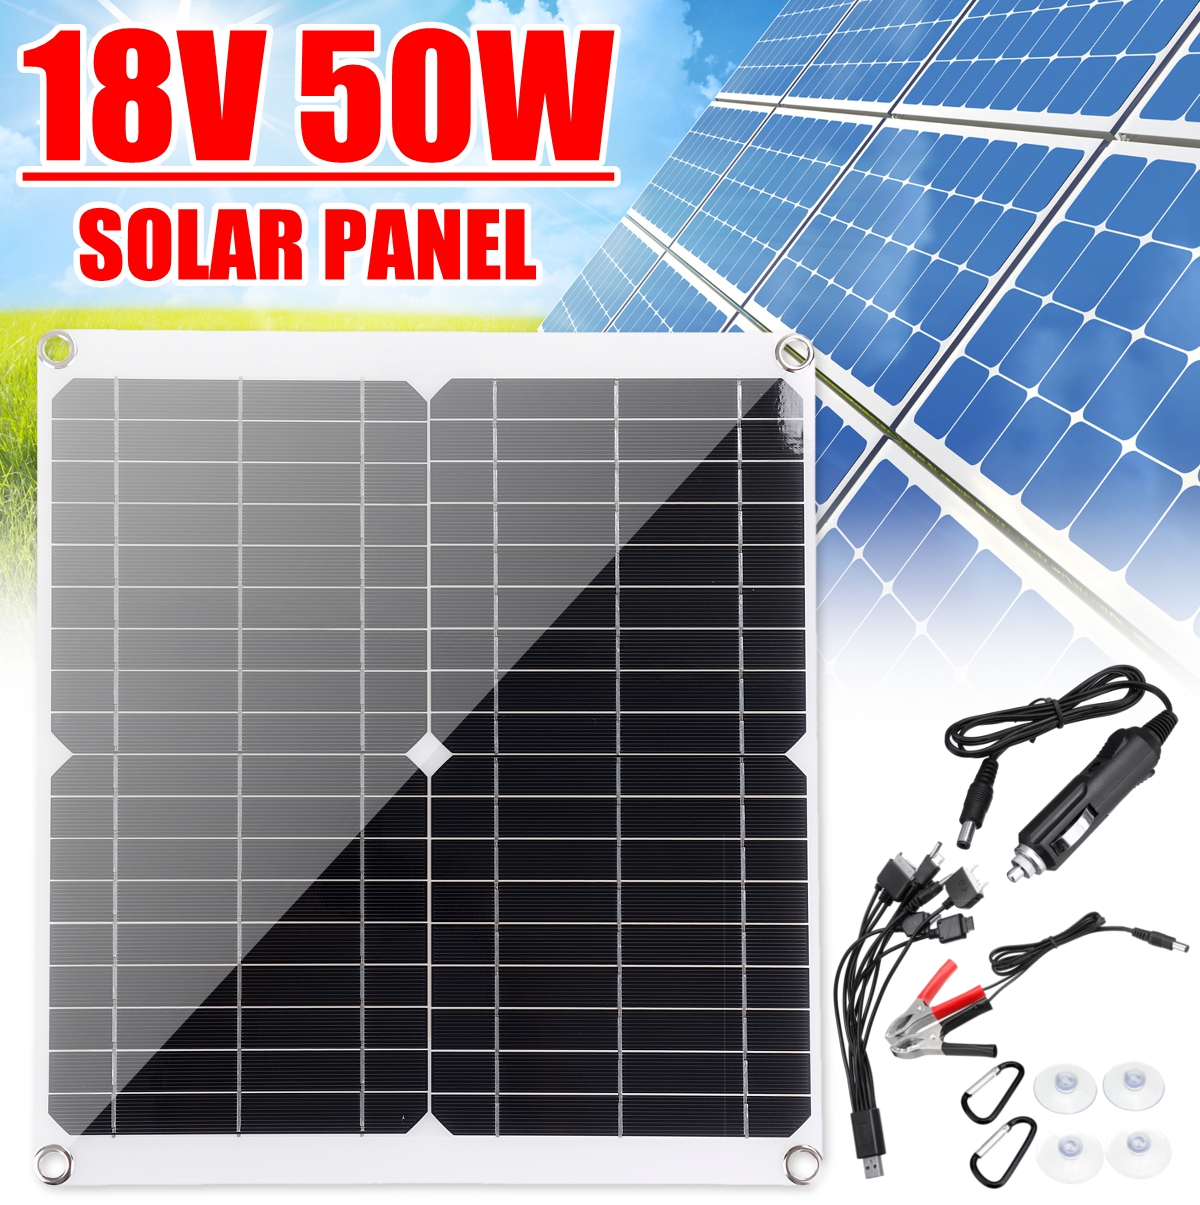 18V-50W-PV-Solar-Panel-Charger-Kit-Monocrystalline-Solar-Panels-with-10-In-1-Adapter-Cable-1779937-1